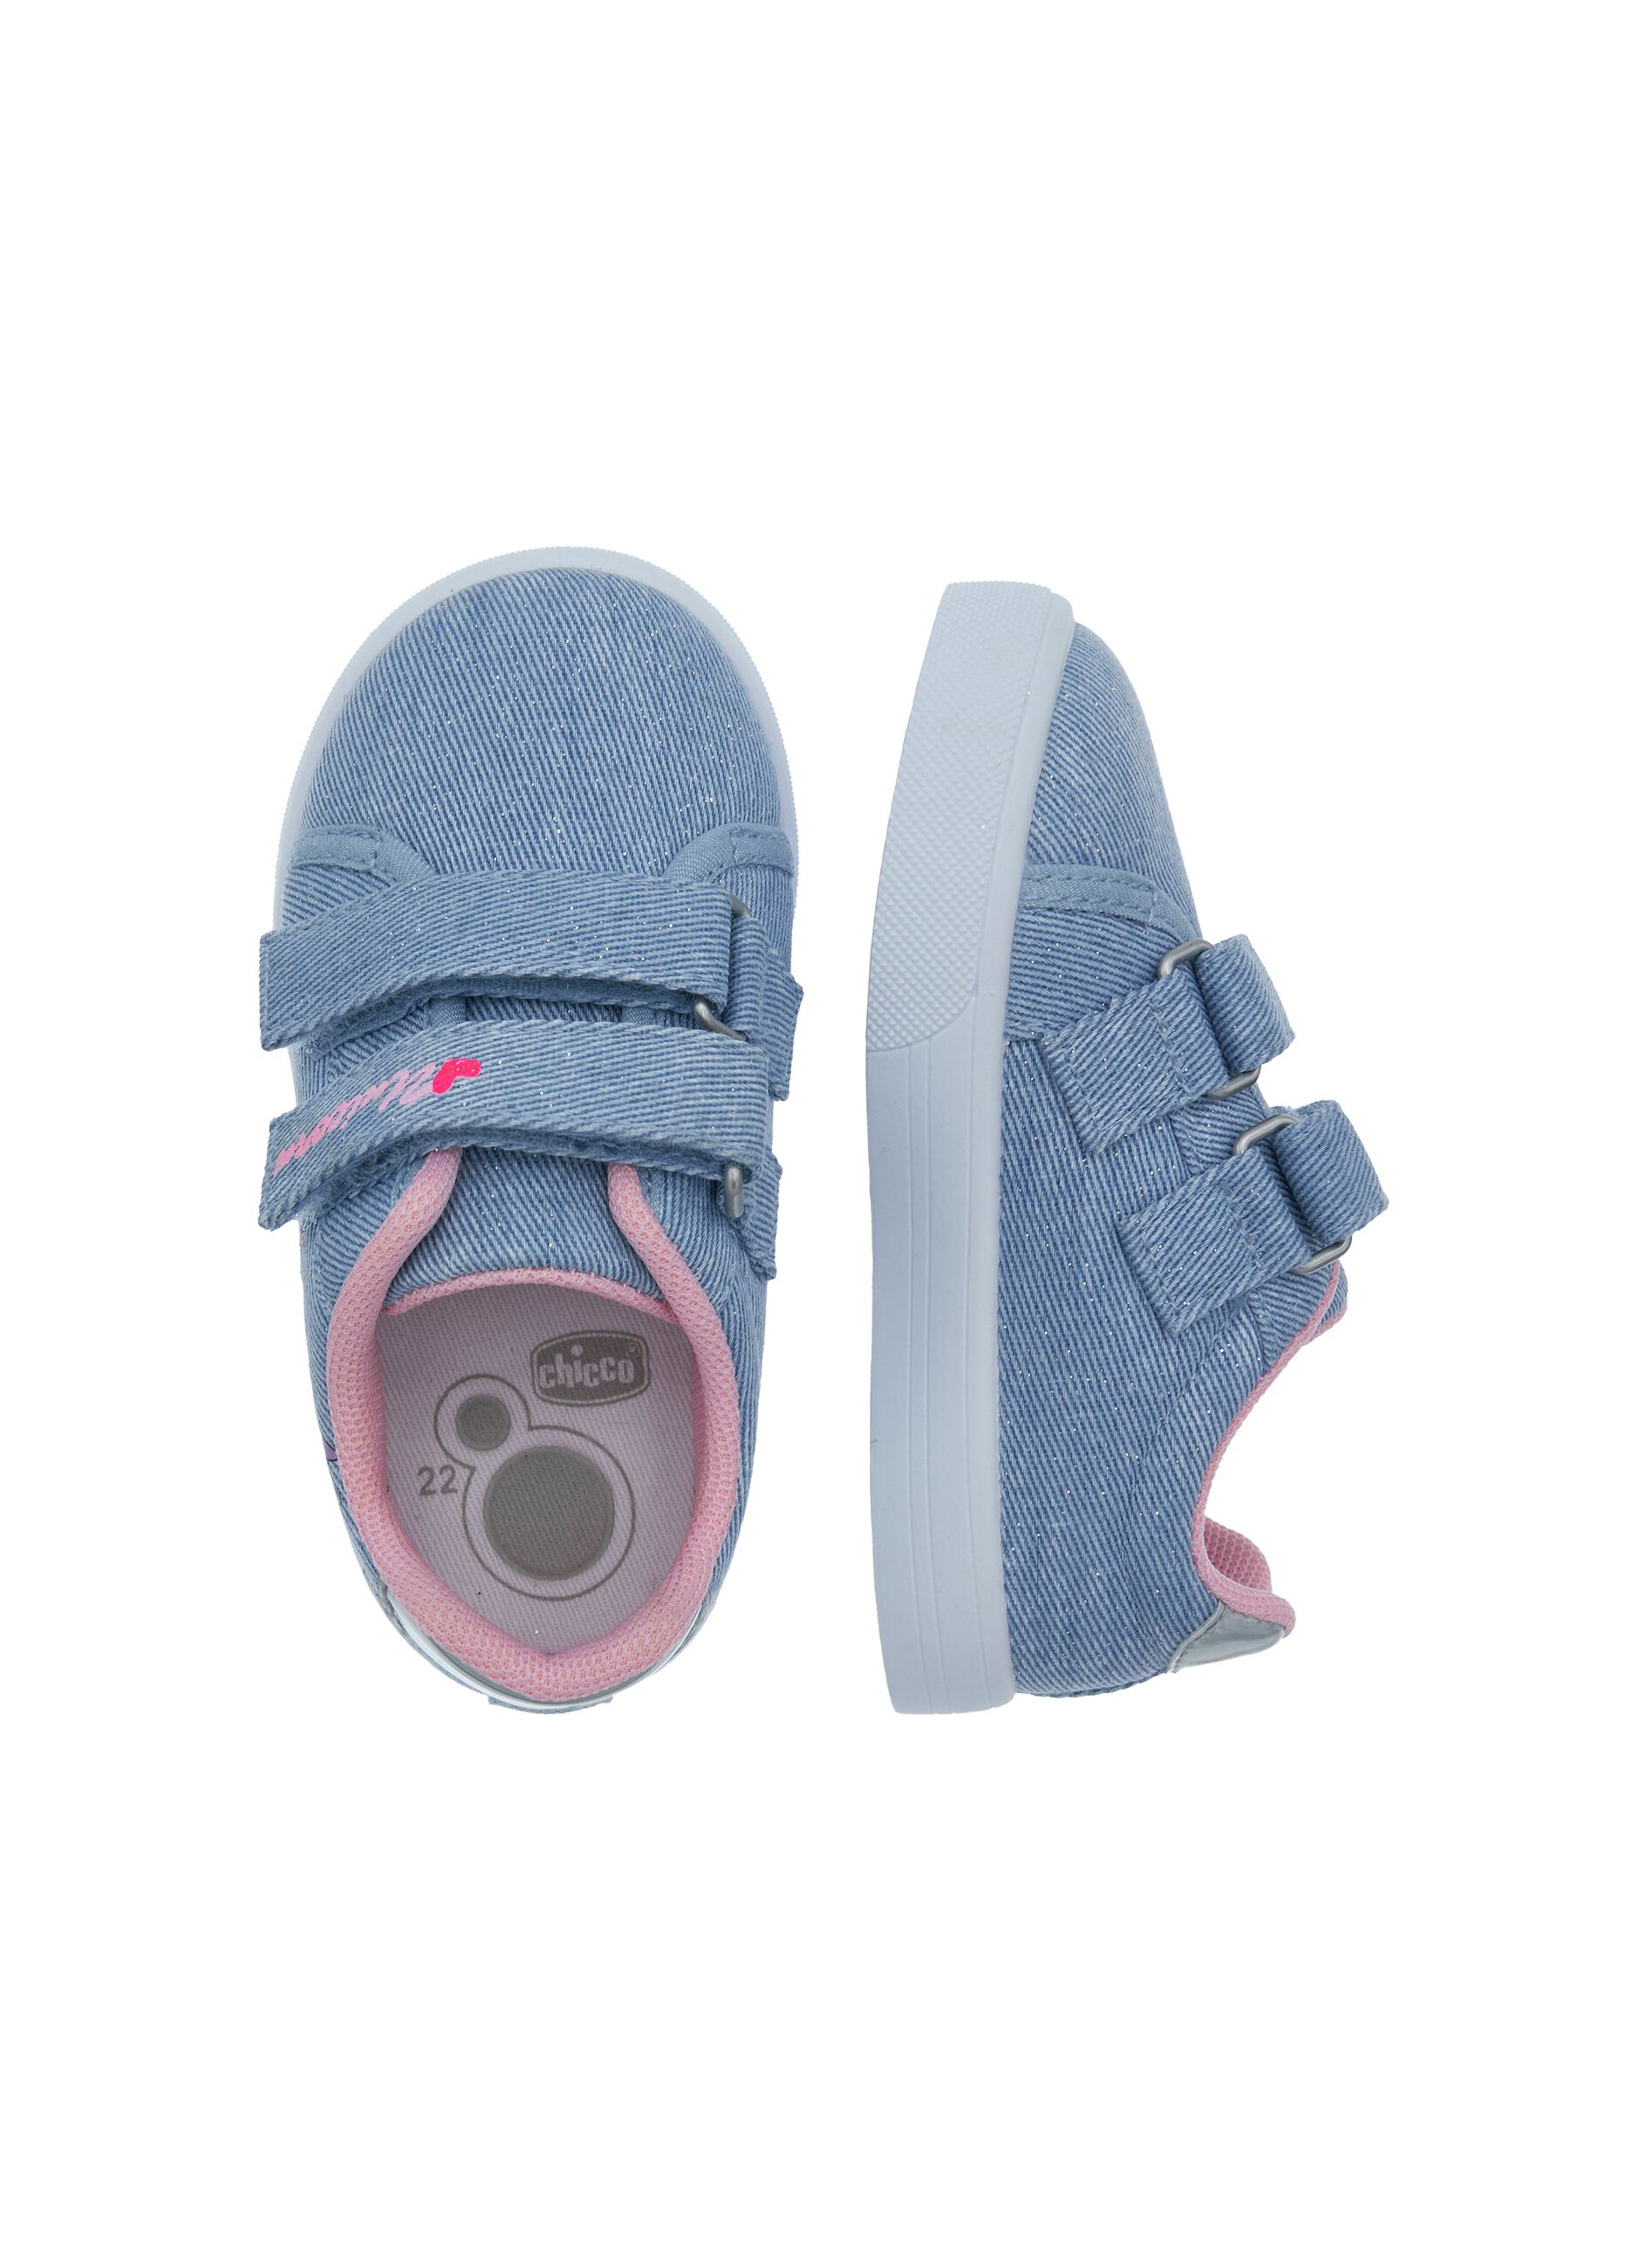 Frona sneakers with double Velcro strap